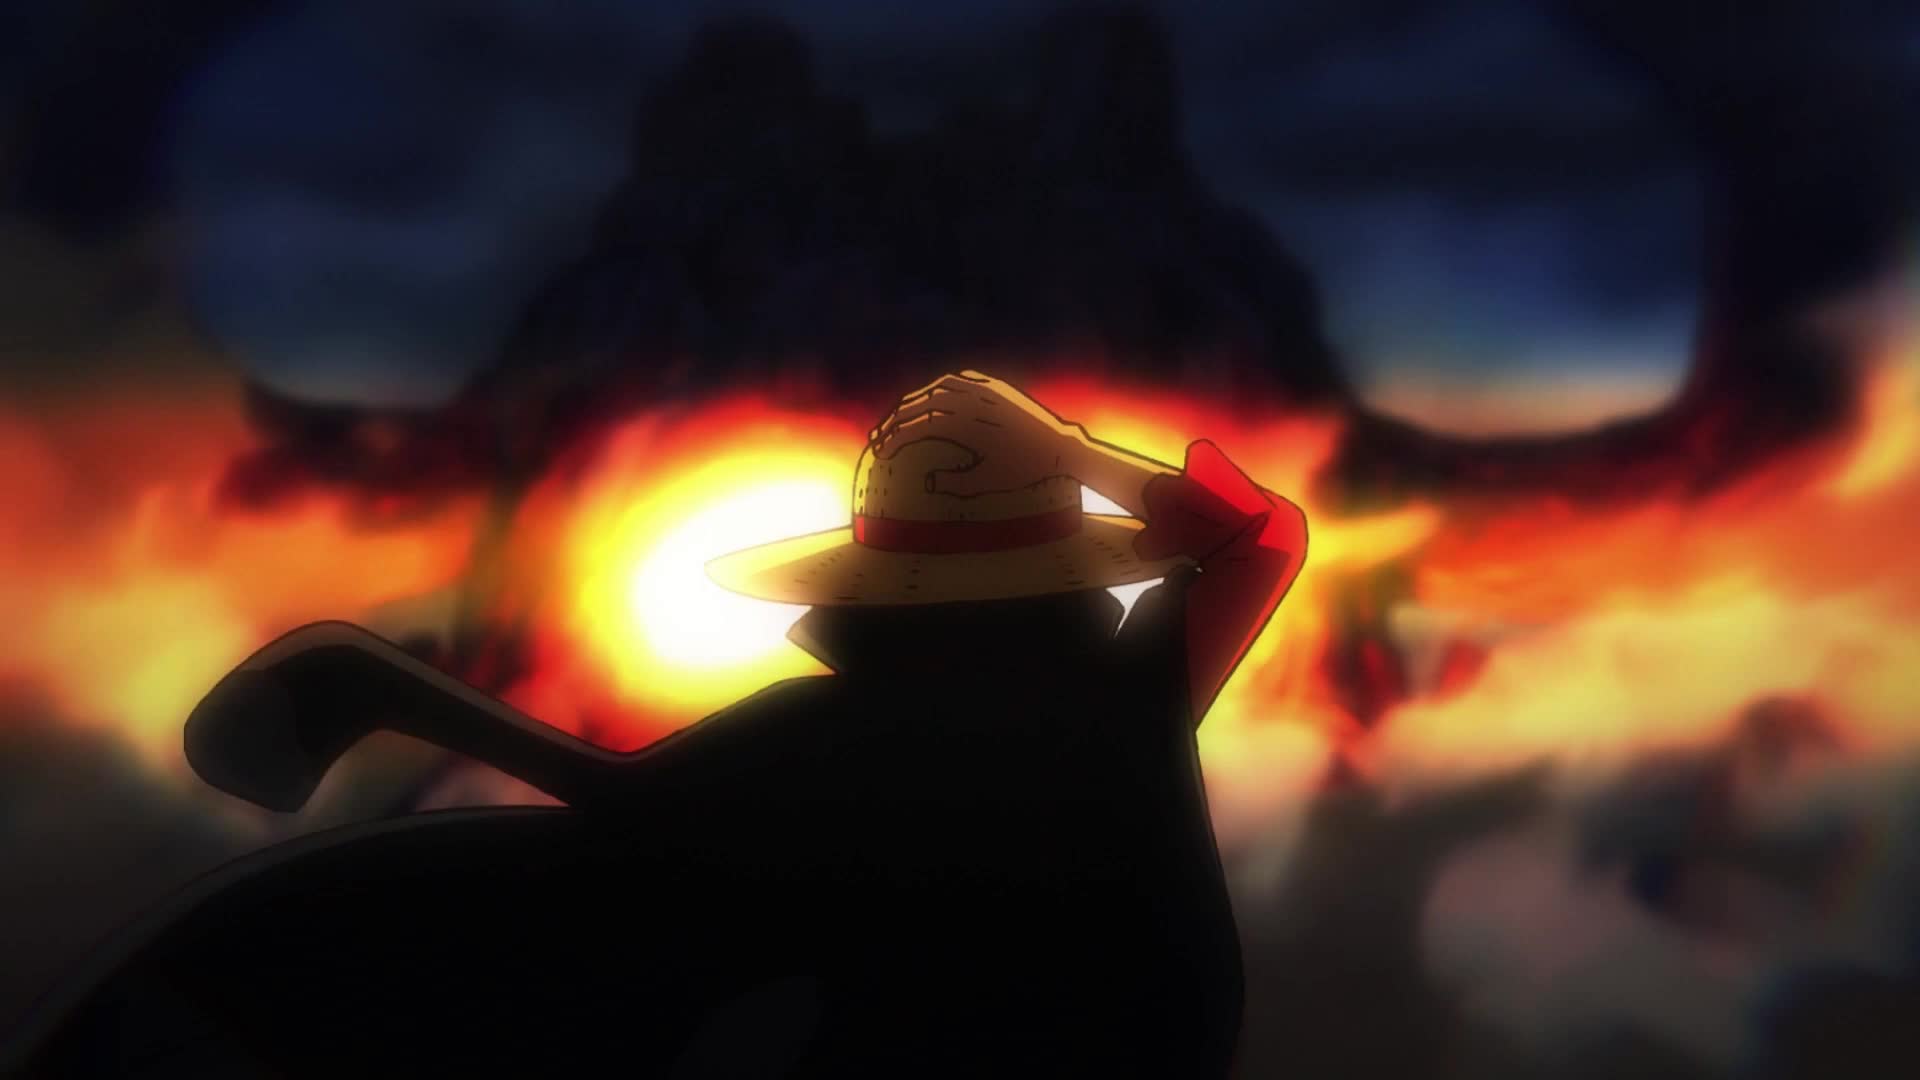 One Piece Luffy Live Wallpaper | 1920X1080 - Rare Gallery Hd Live